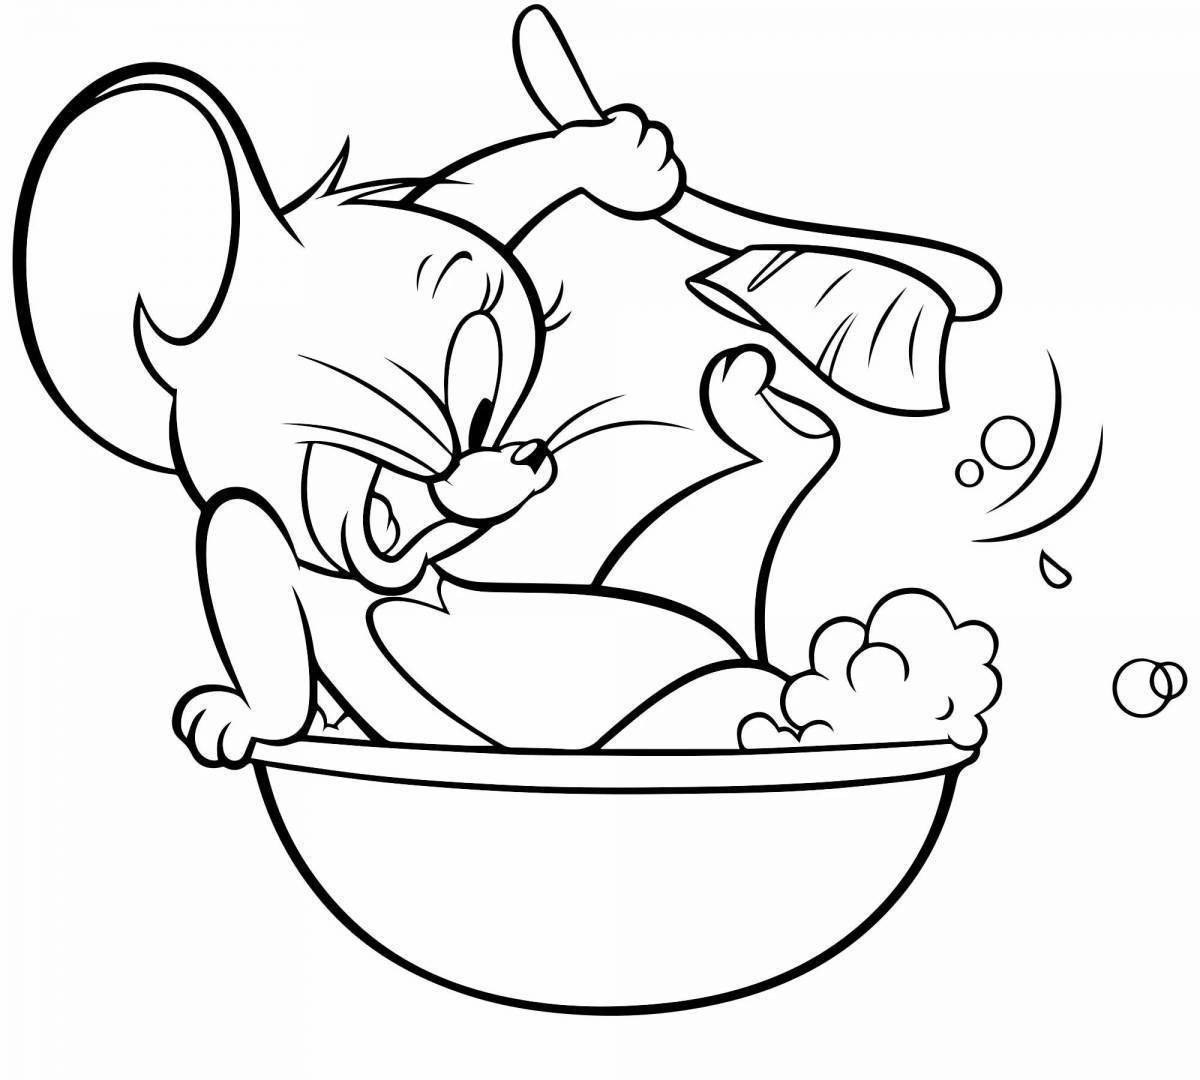 Colorful jerry coloring page